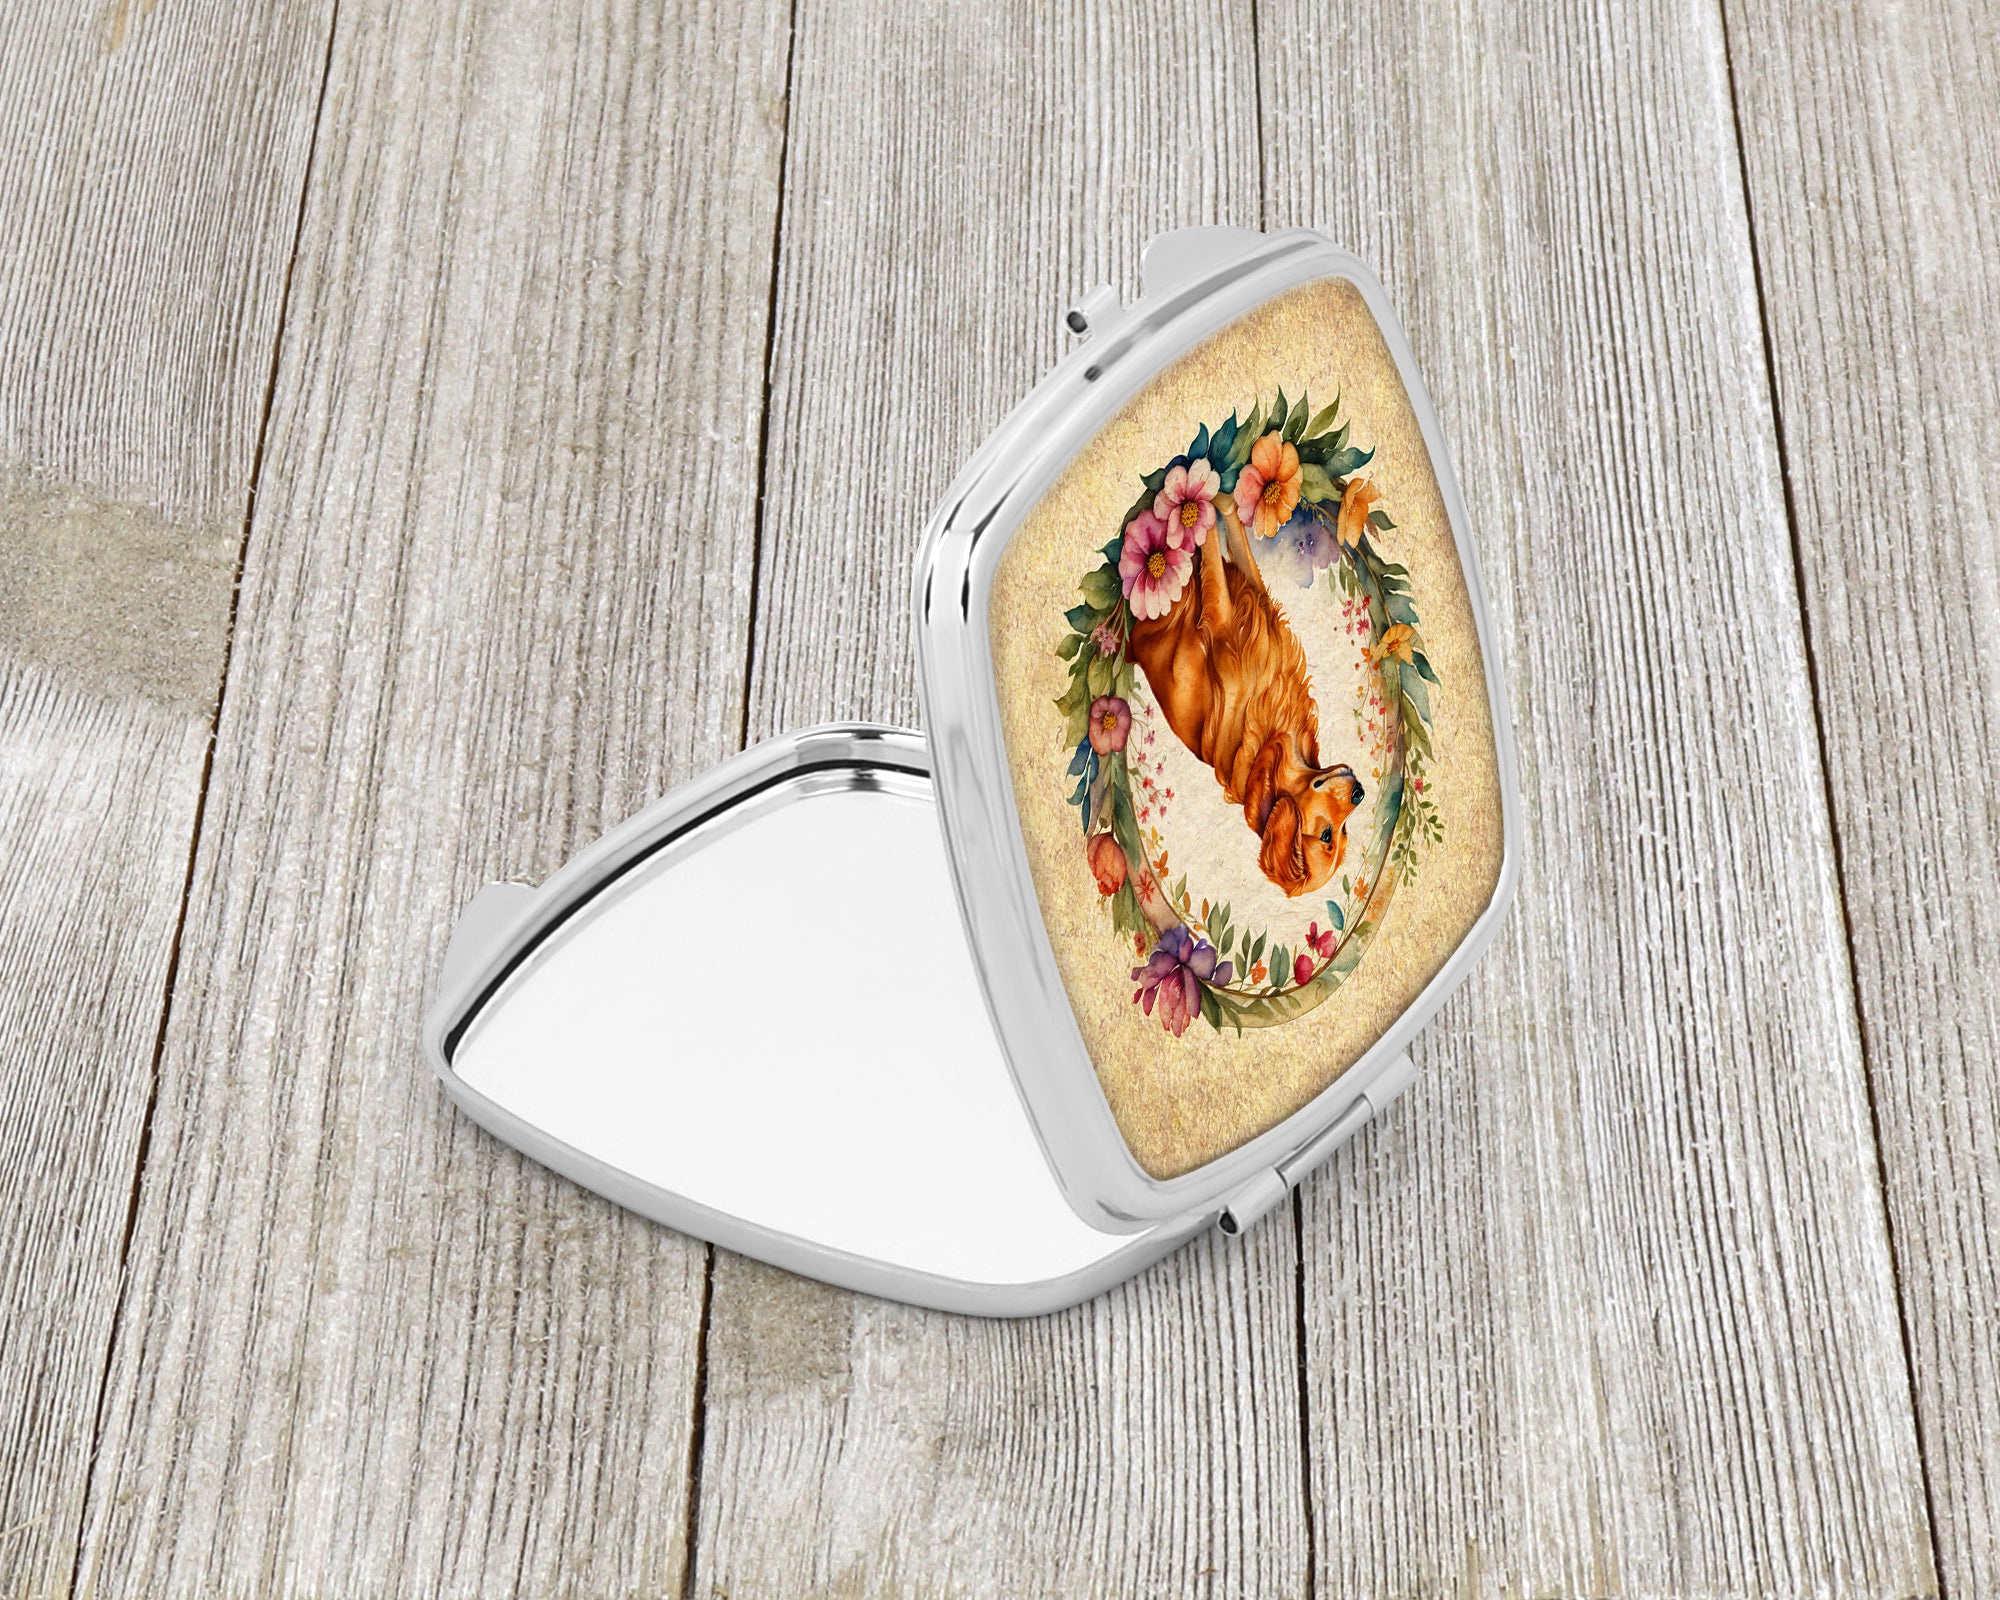 Buy this Nova Scotia Duck Tolling Retriever and Flowers Compact Mirror